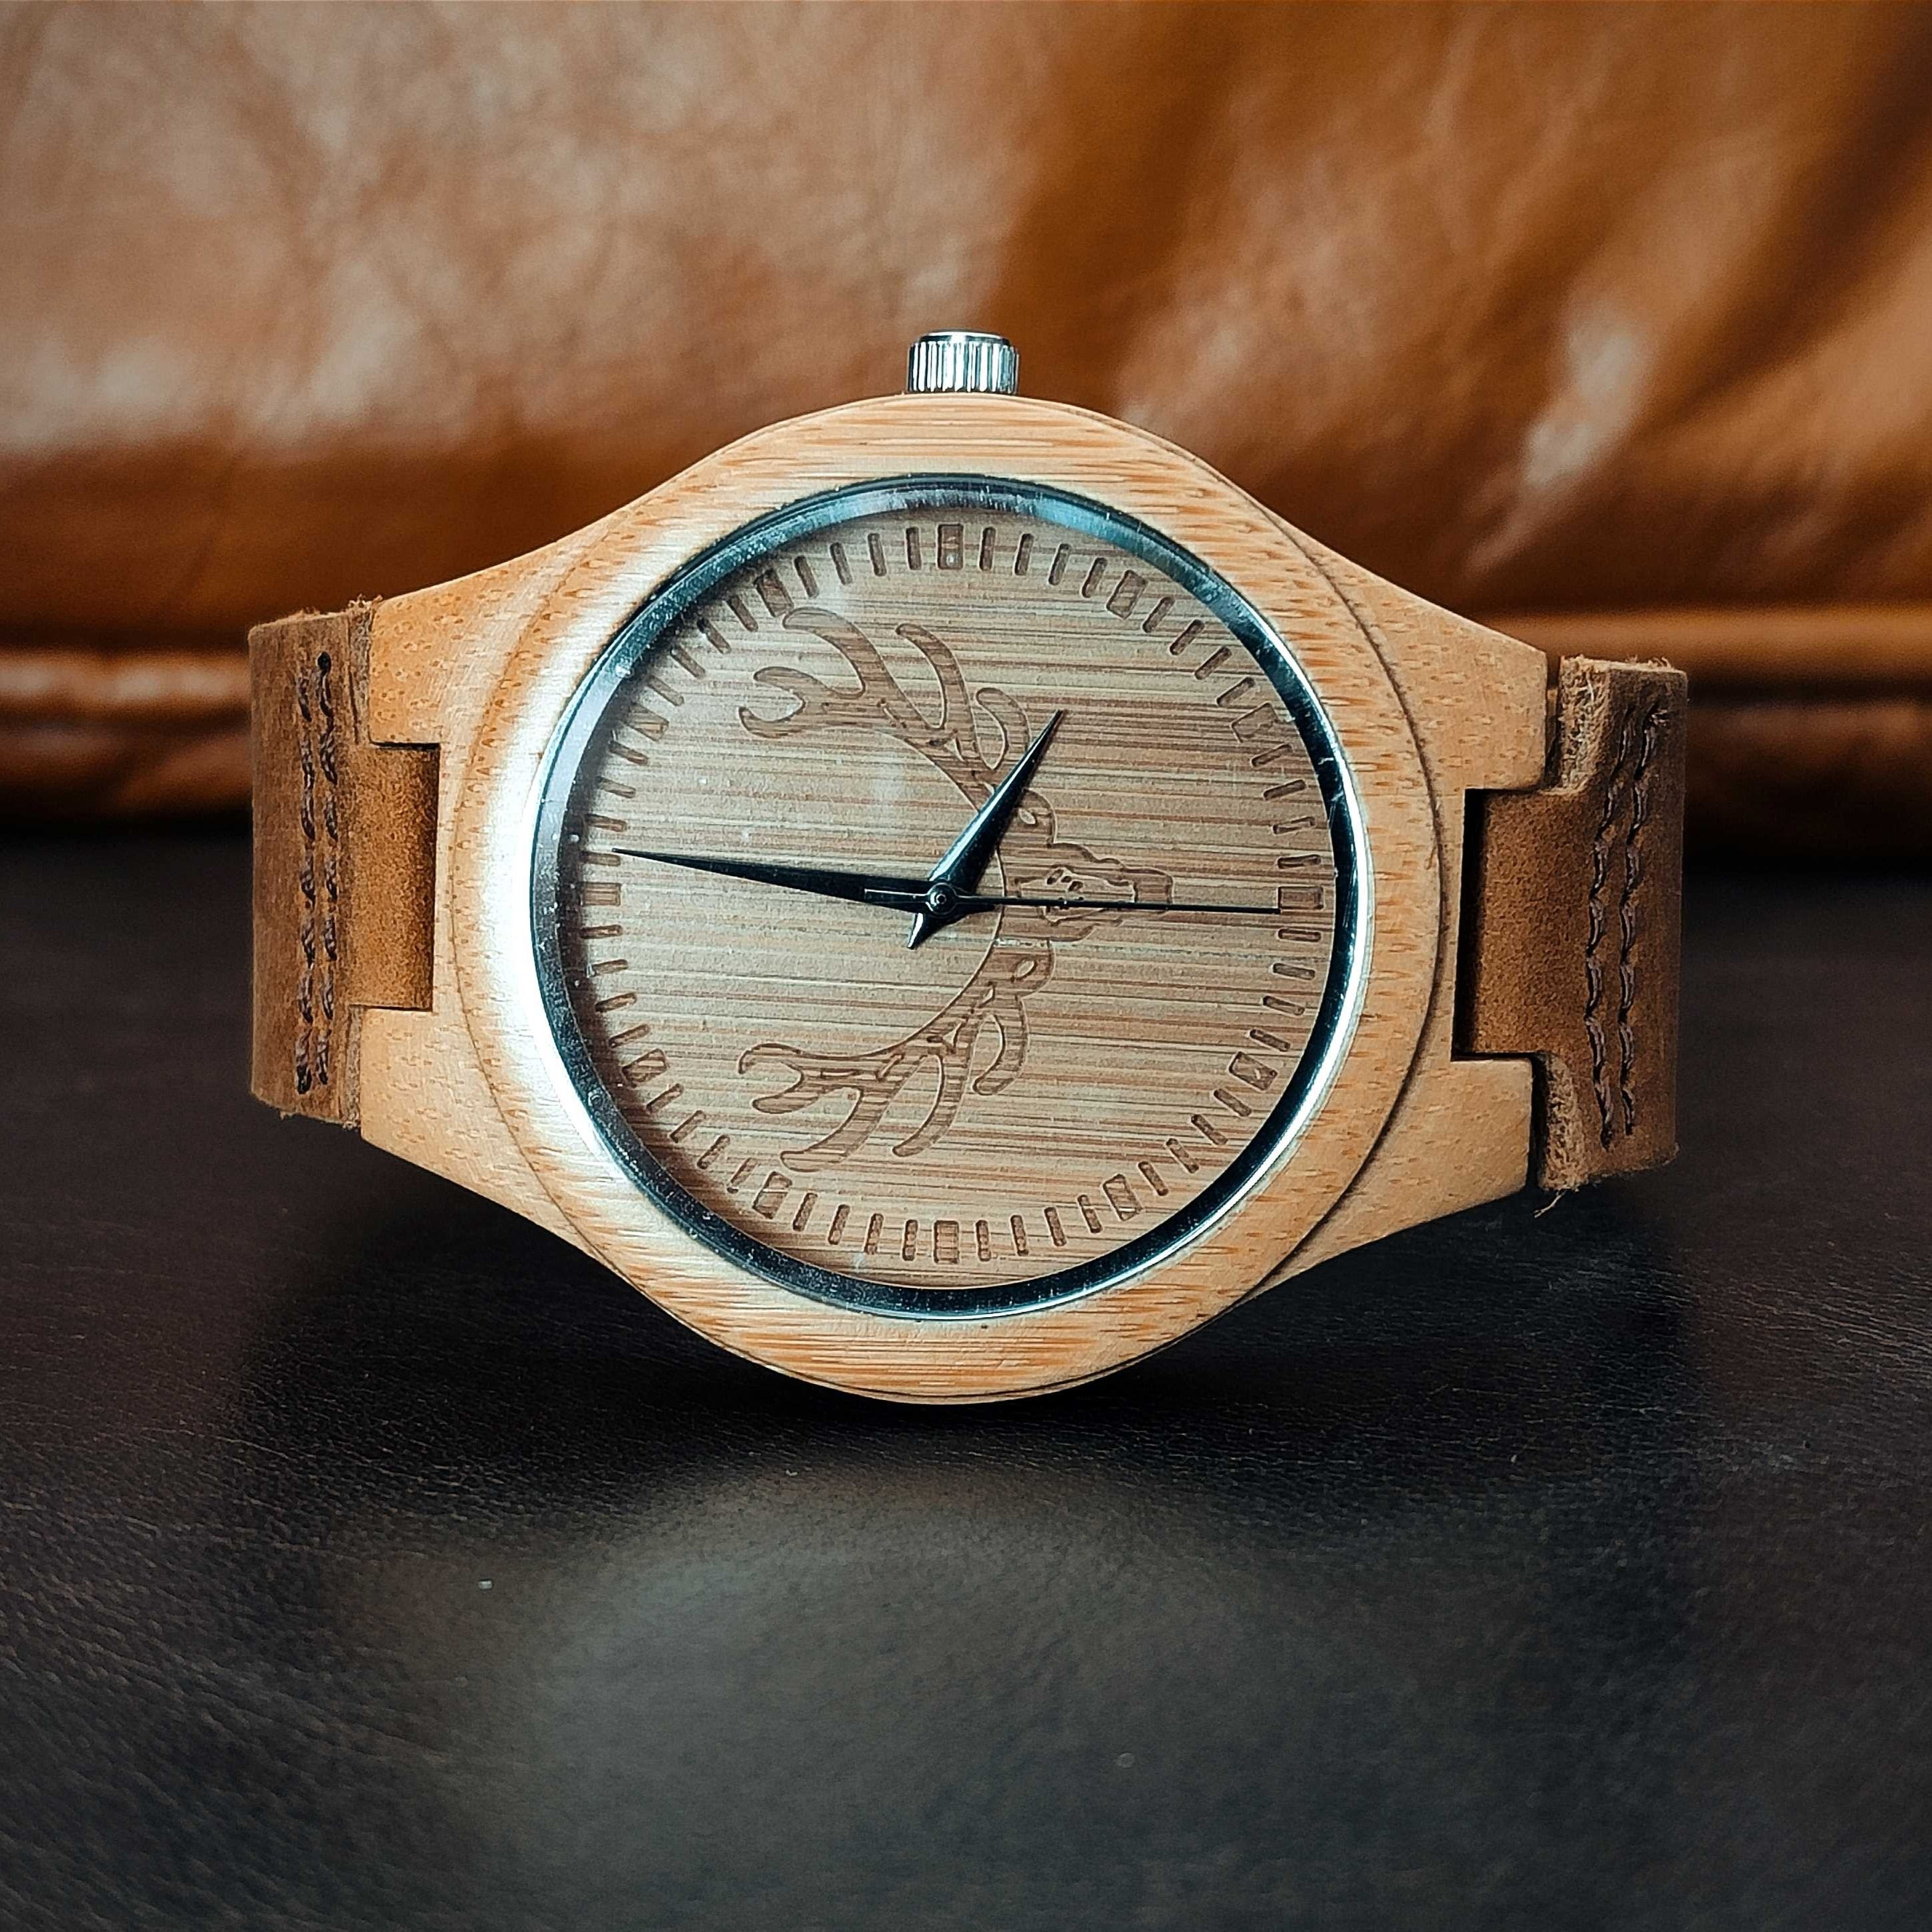 The Antler Bamboo Wooden Watch With Leather Strap - Unisex